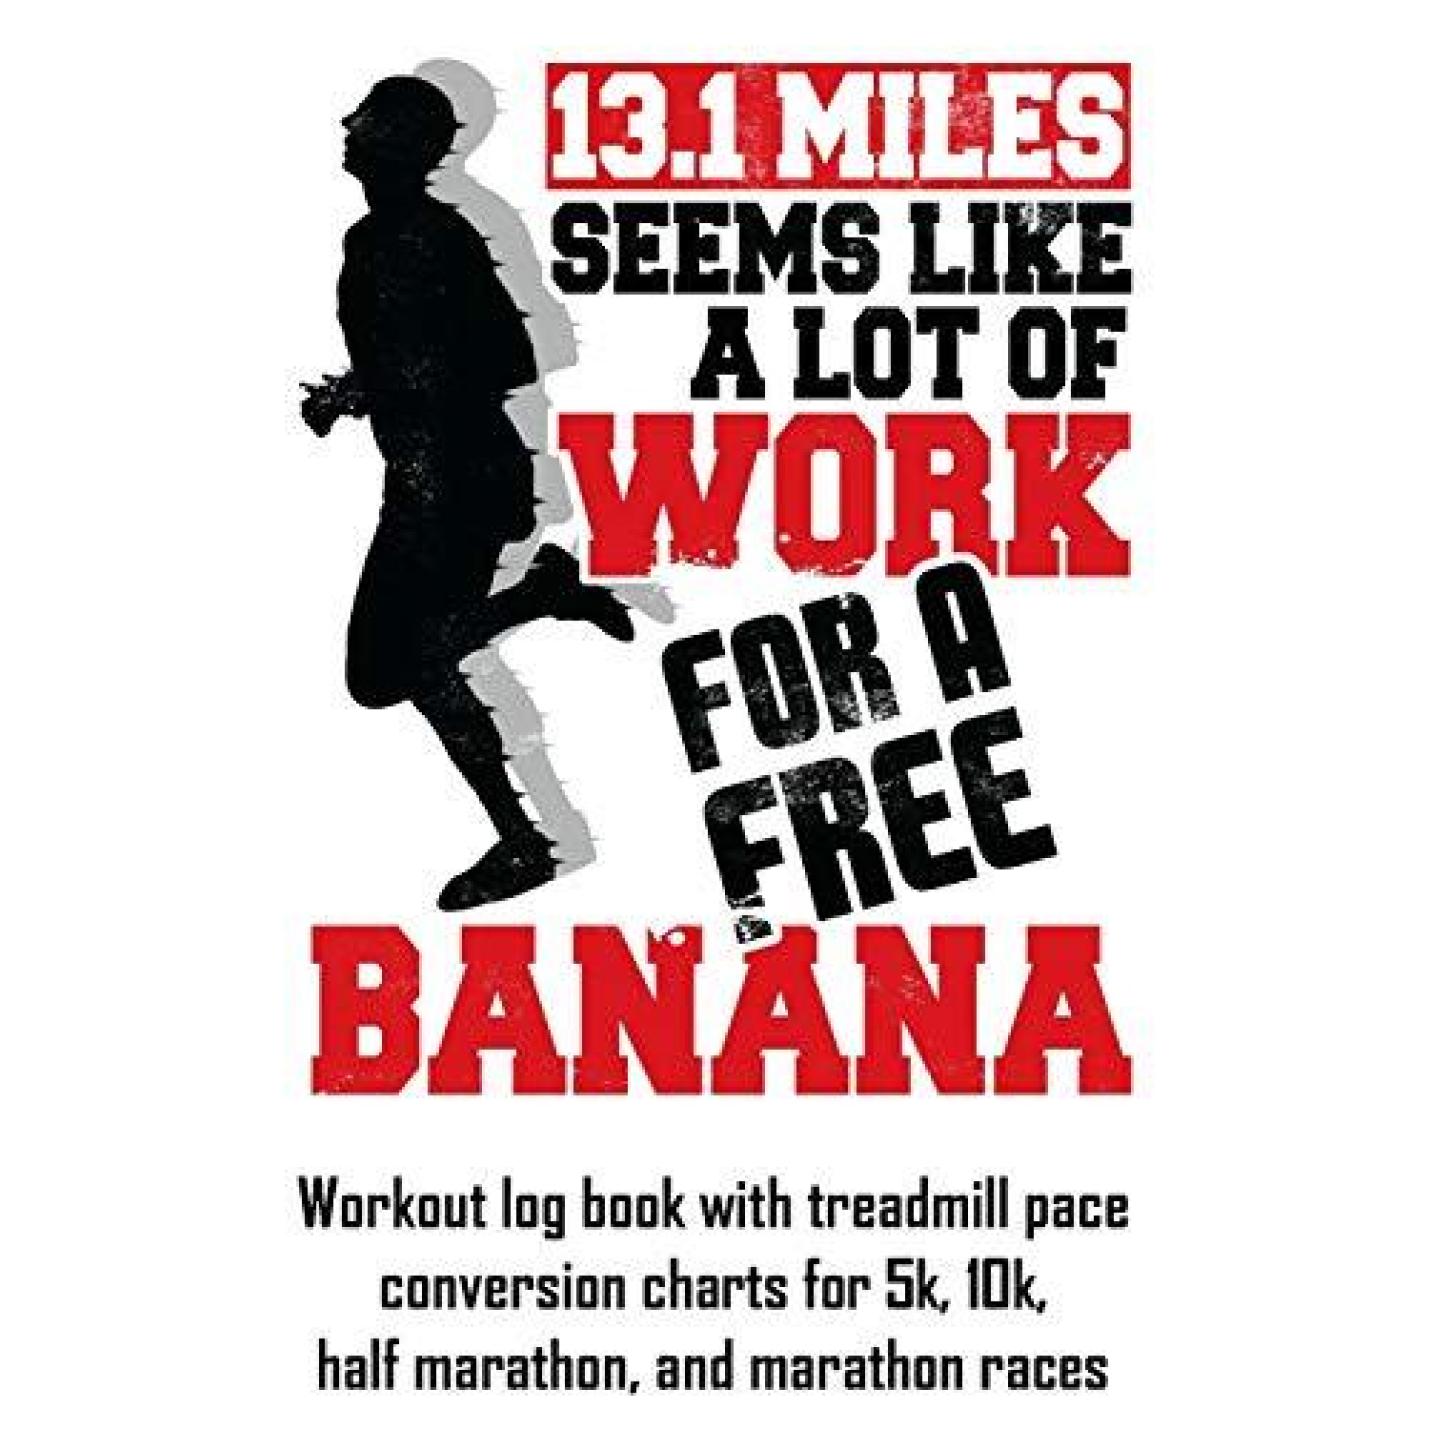 13.1 Miles Seems Like a Lot of Work for a Free Banana: Workout Log Book with Treadmill Pace Conversion Charts Paperback